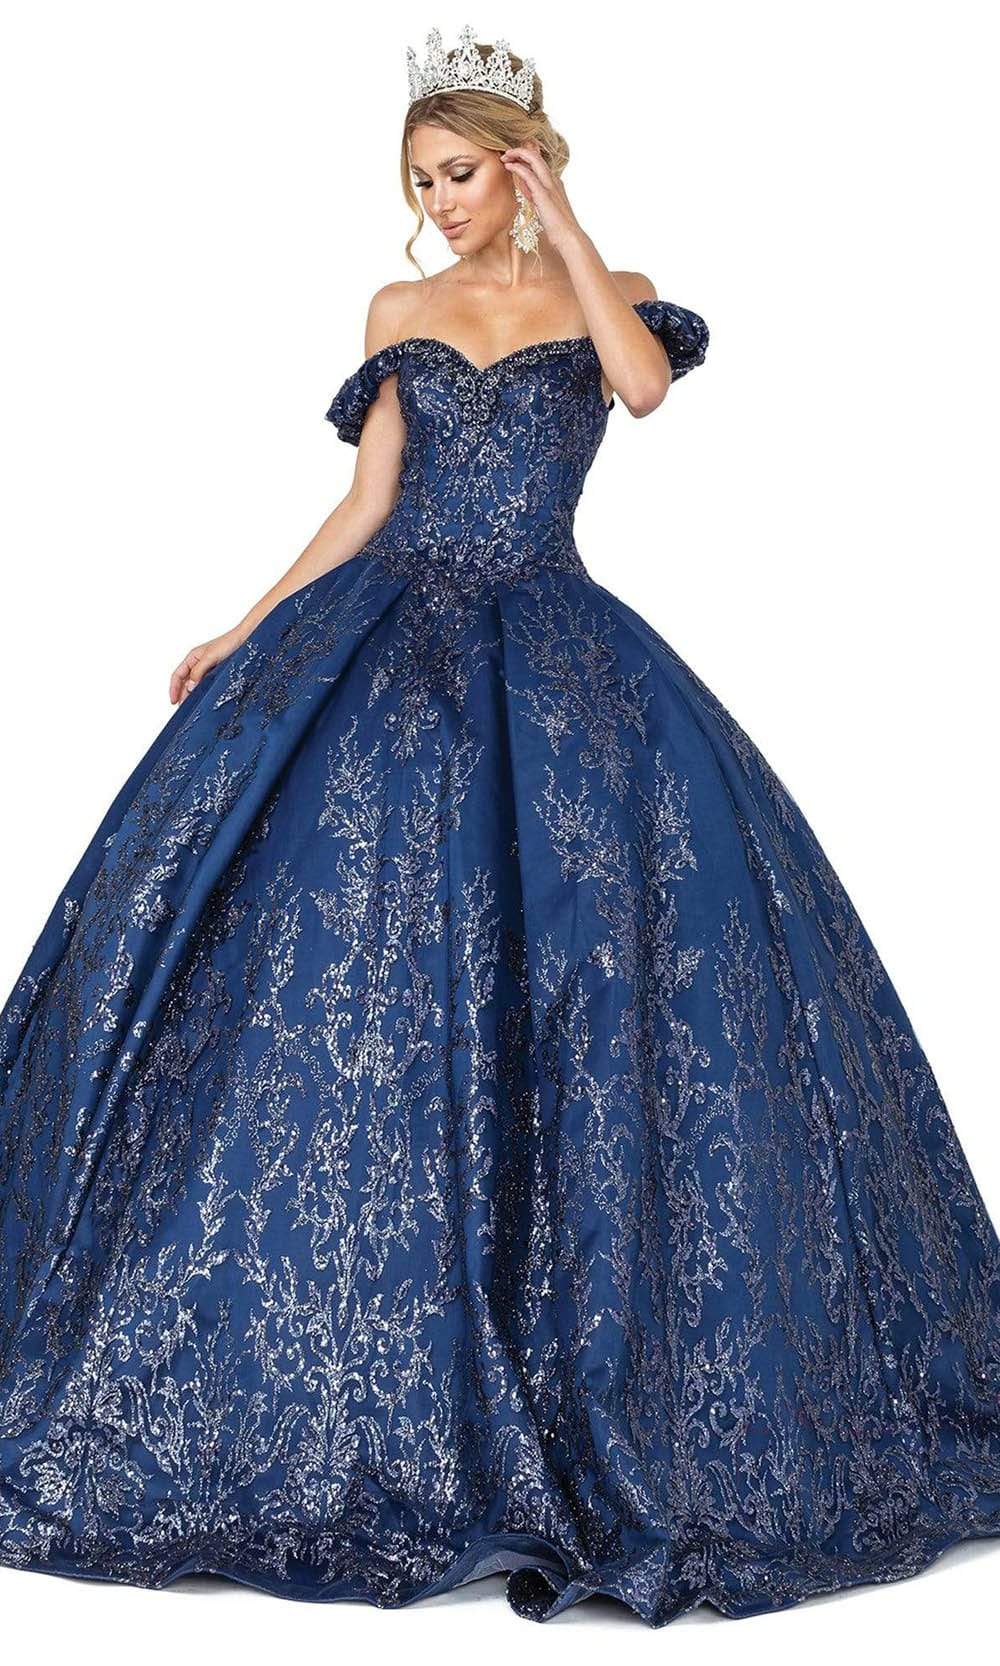 Dancing Queen - 1643 Beaded Sweetheart Glittery Gown Special Occasion Dress XS / Navy